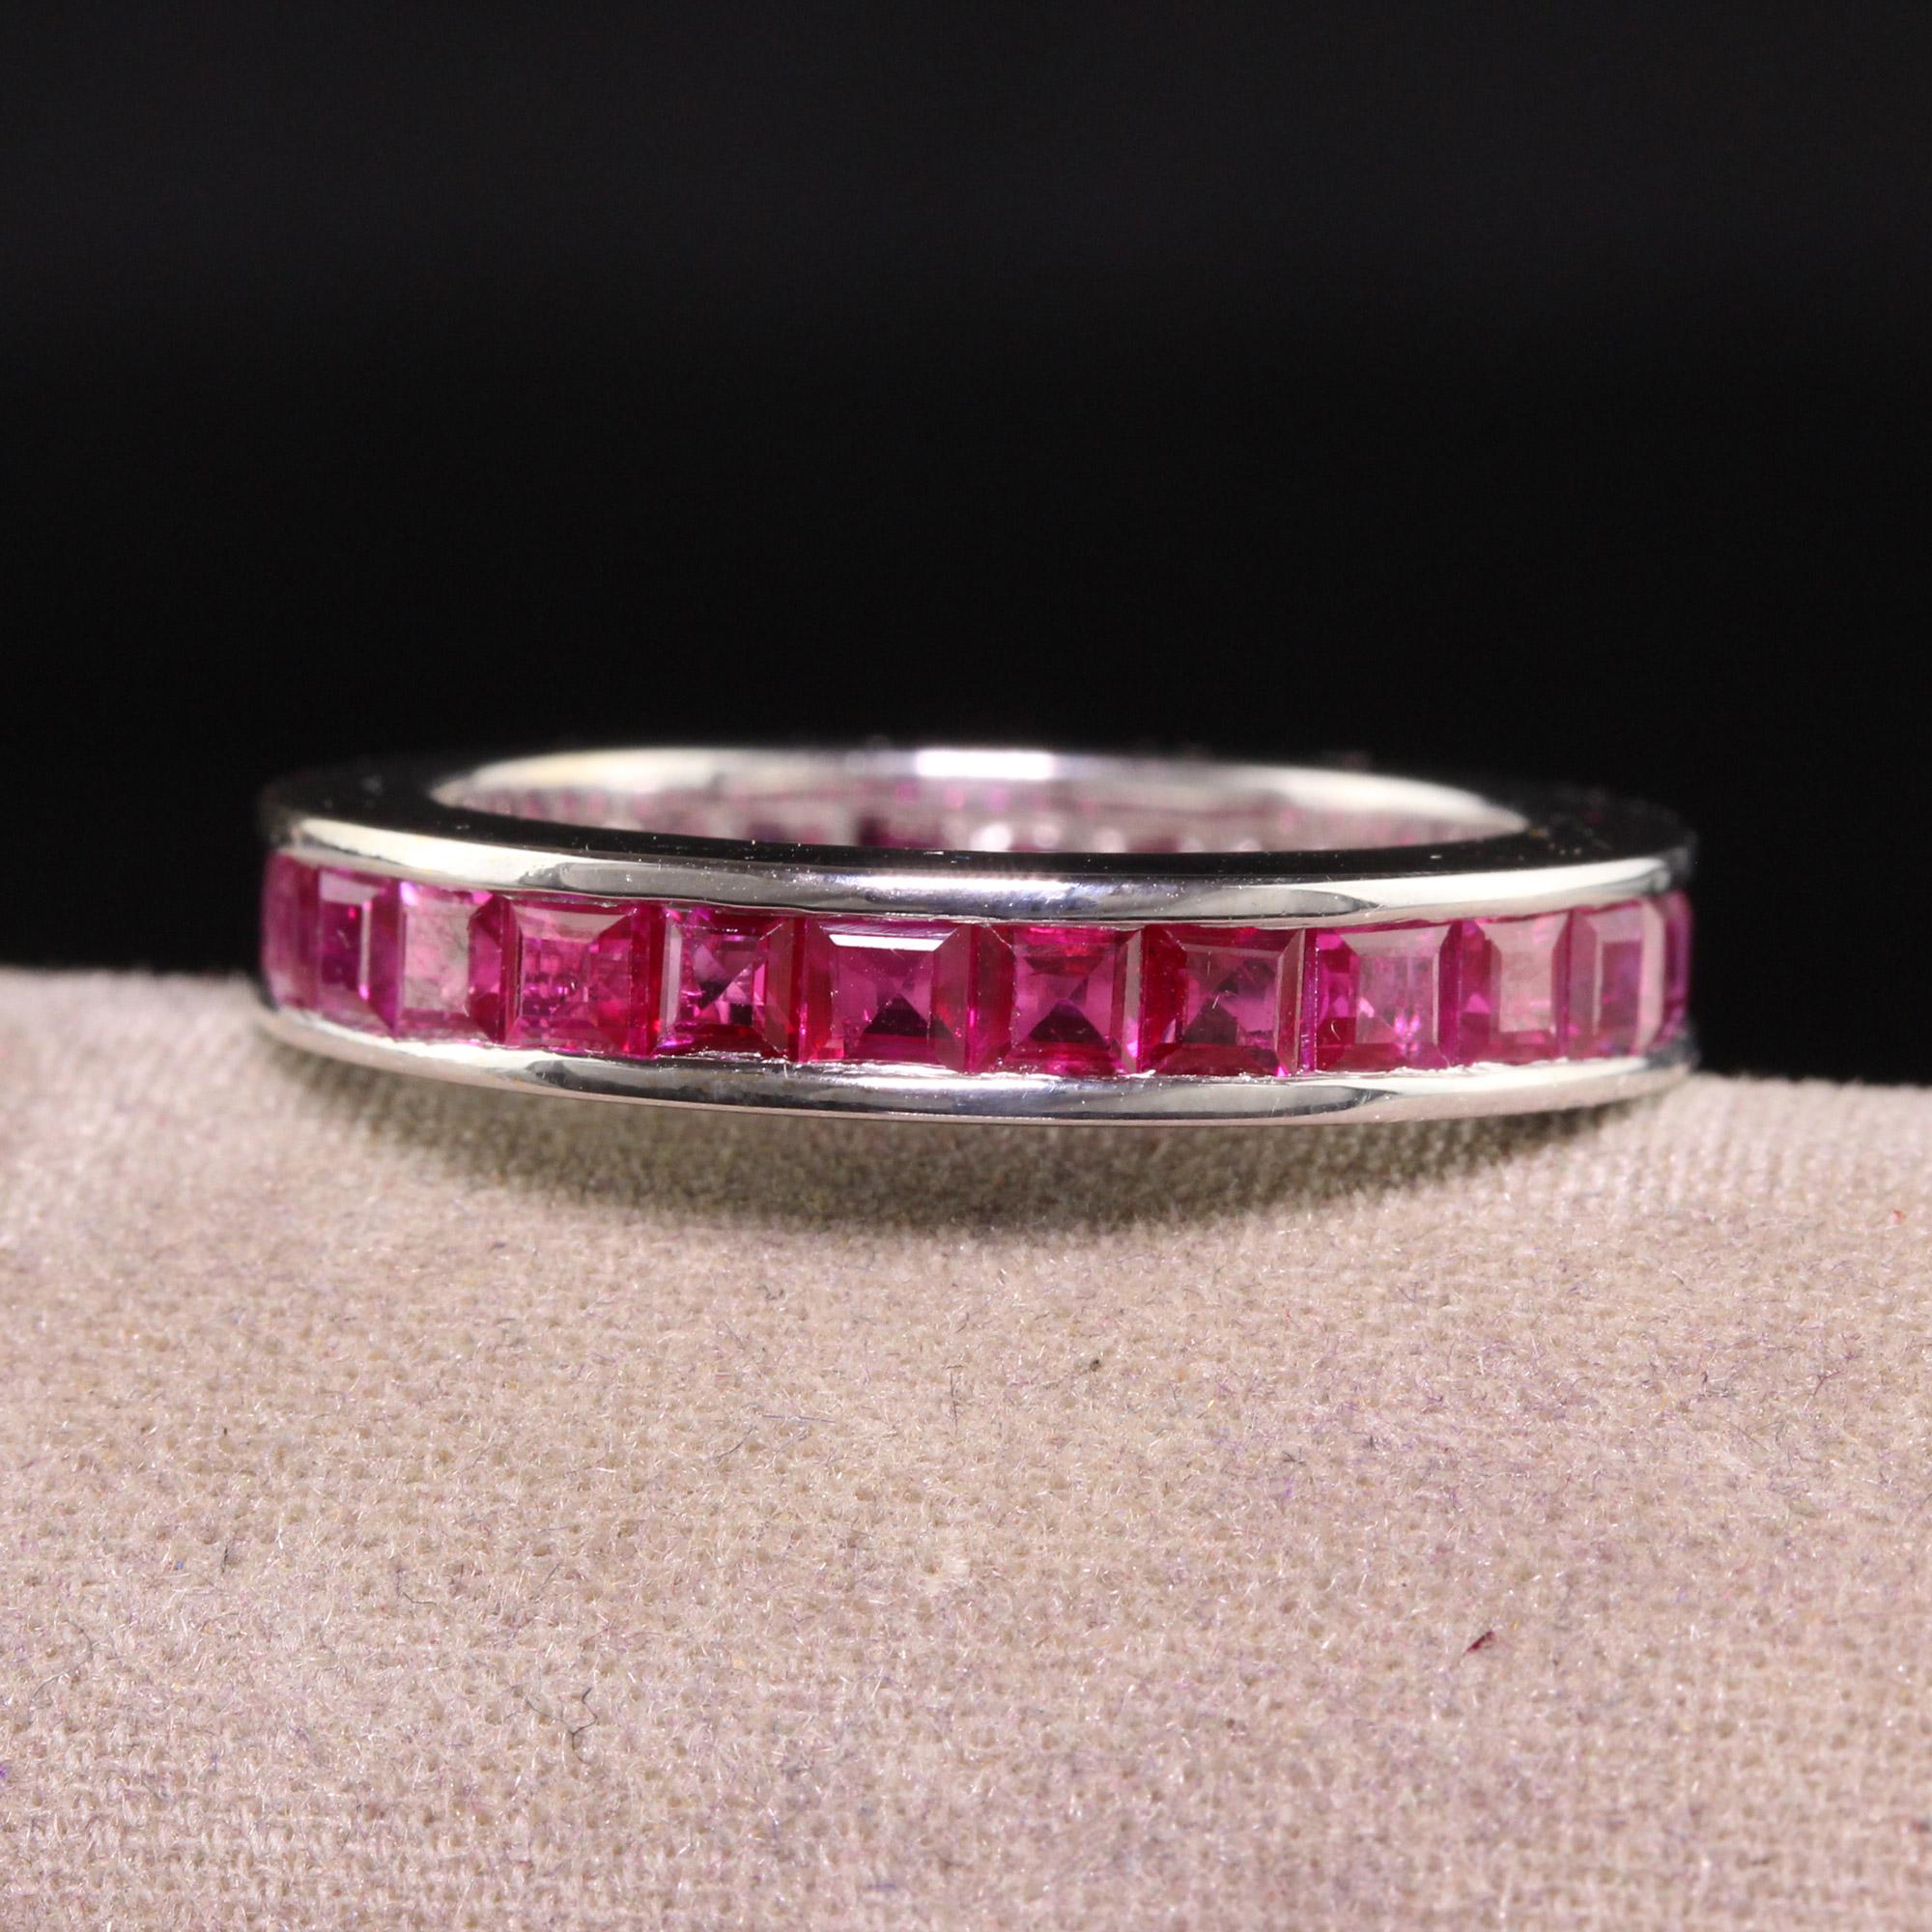 Beautiful Vintage Estate 18K White Gold Square Cut Ruby Eternity Band. This beautiful band is crafted in 18k white gold. It has natural rubies going around the entire ring and it is in great condition with vibrant color.

Item #R1380

Metal: 18K